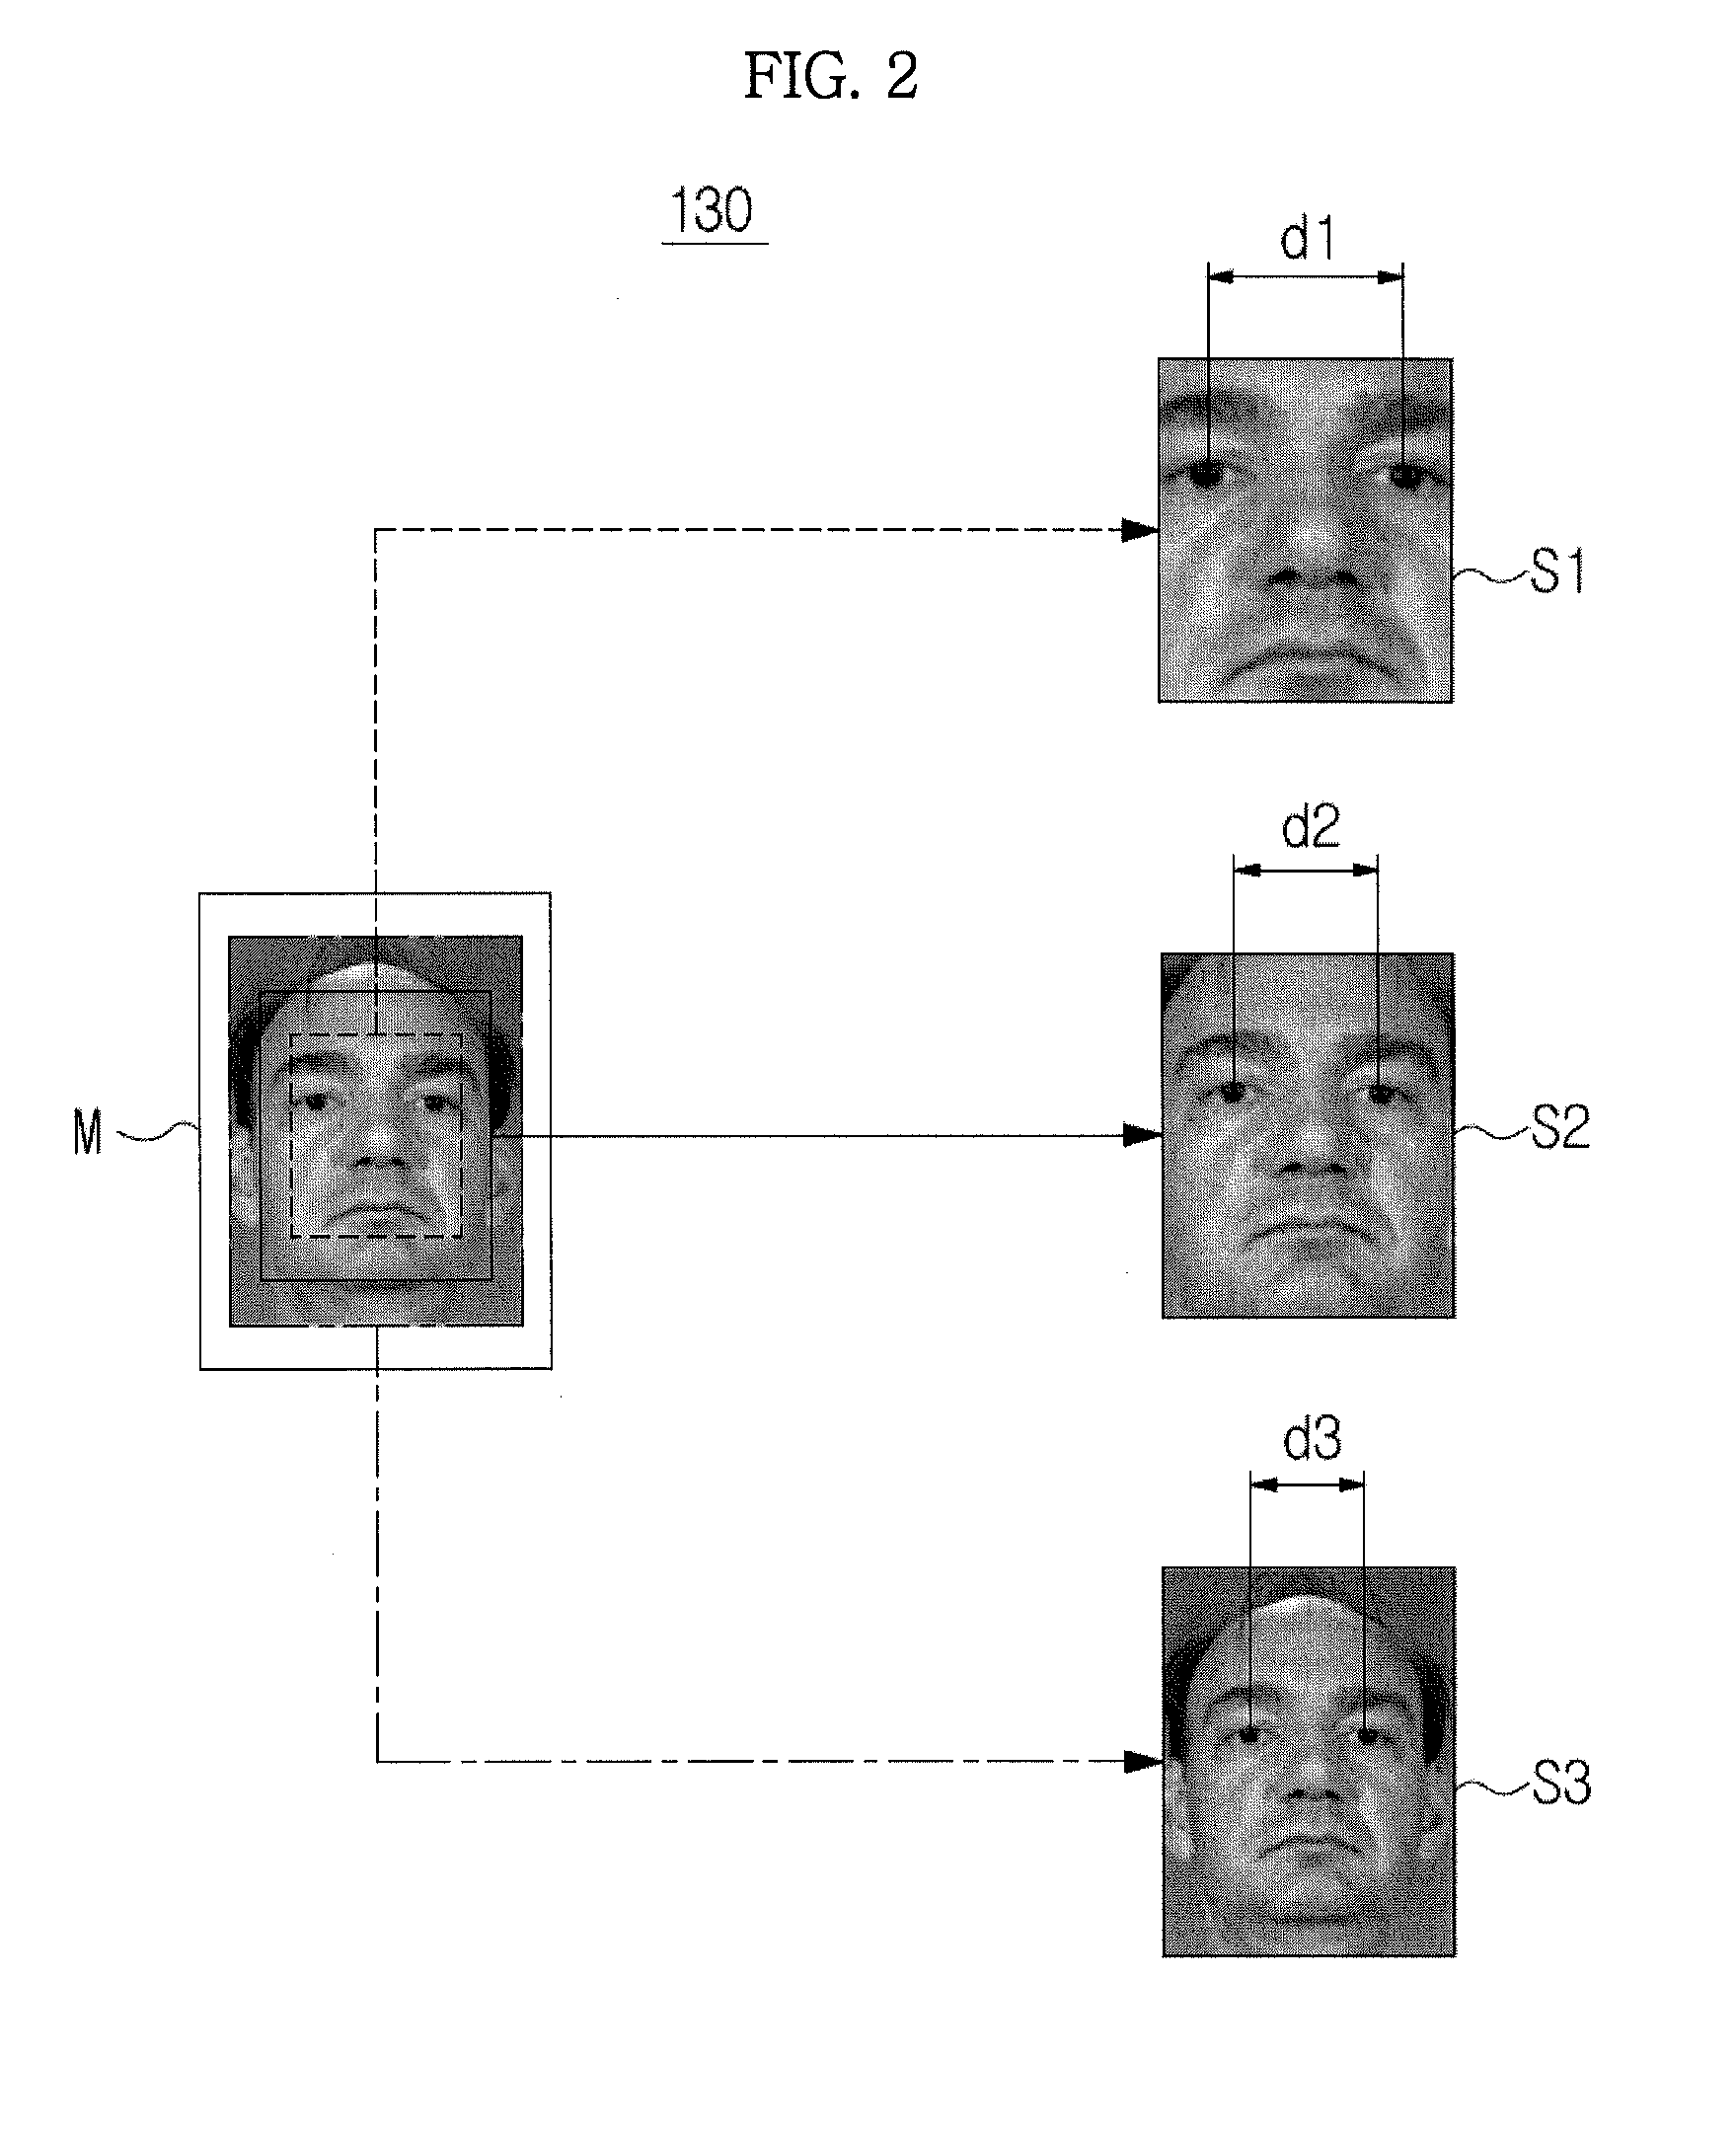 Face recognition apparatus and method